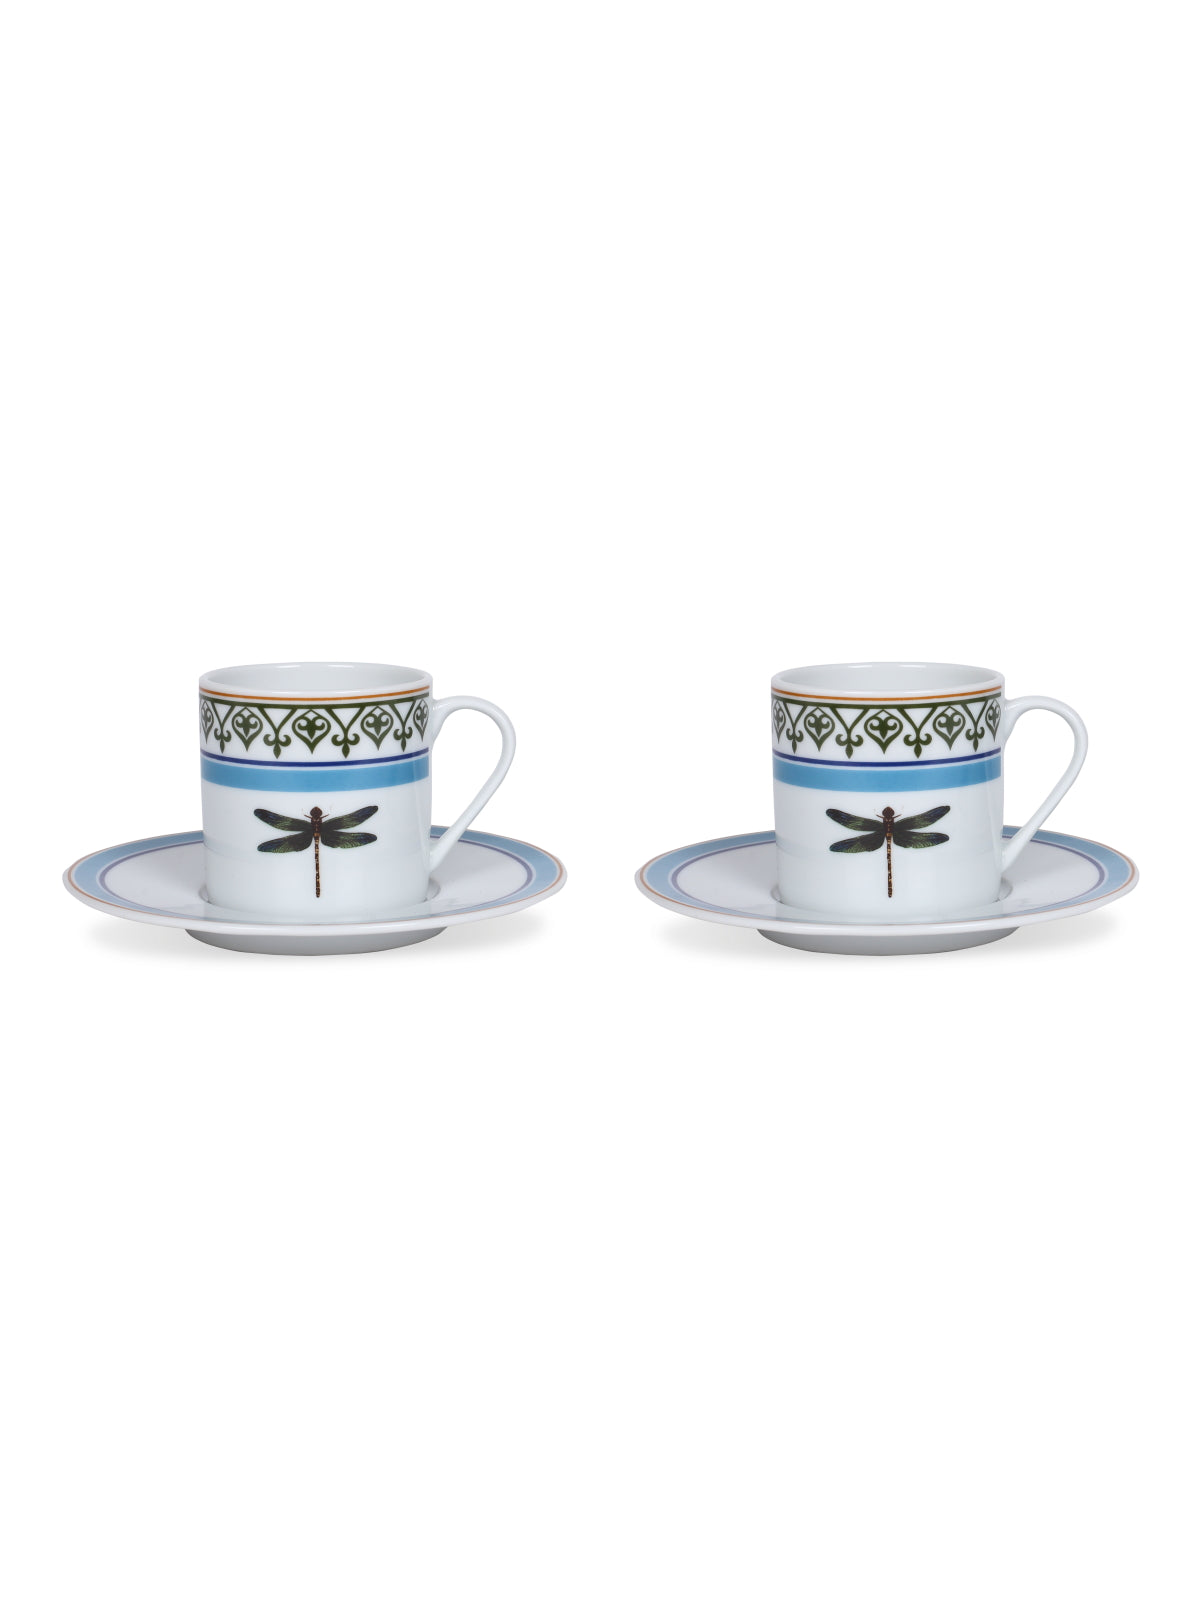 Lady Dragonfly Set of Turkish Coffee Cups